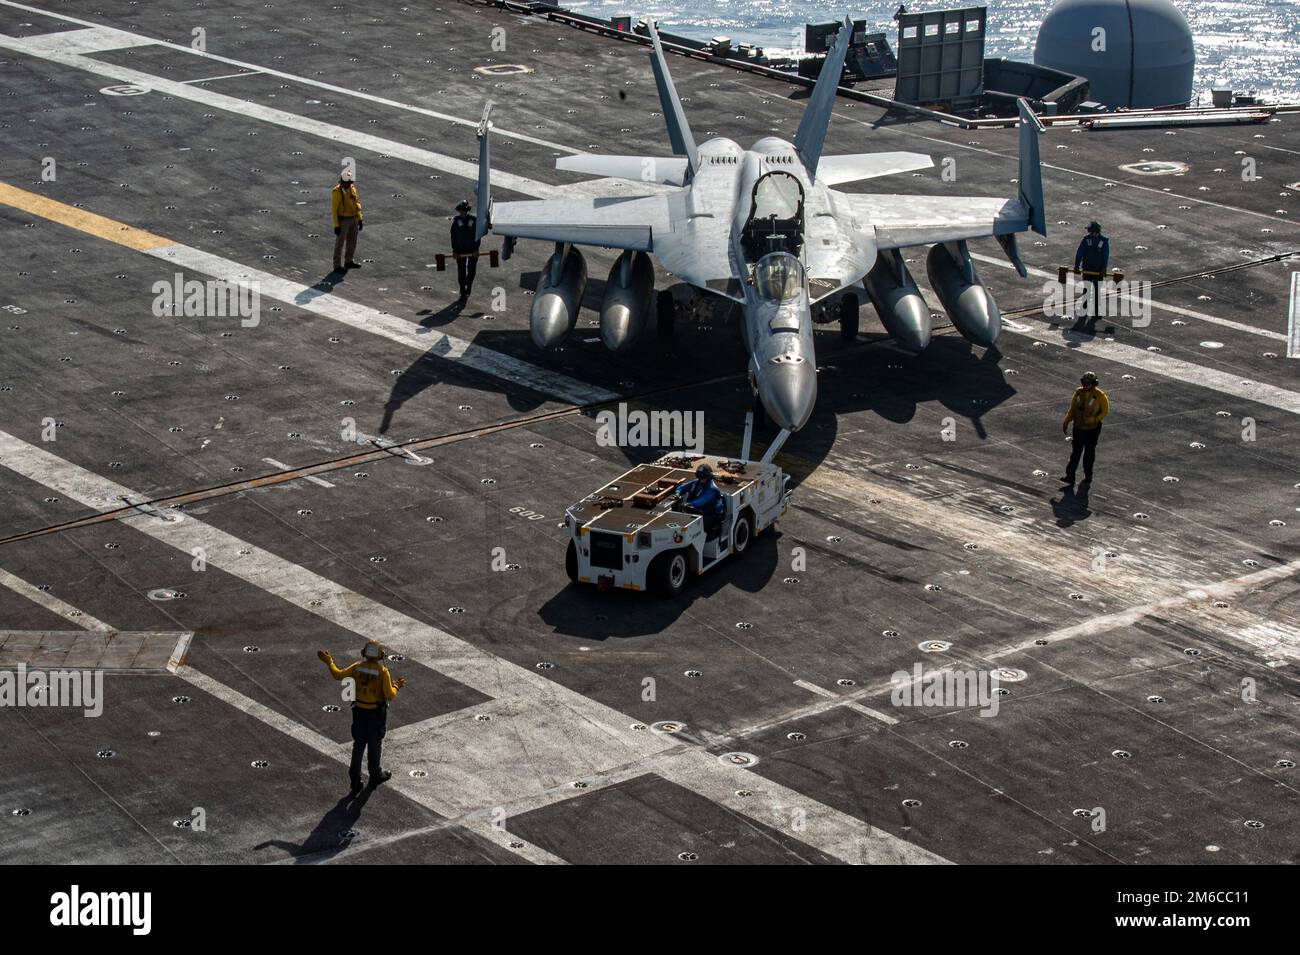 USS Nimitz, United States. 02 January, 2023. A U.S. Navy F/A-18E Super Hornet fighter aircraft from the Kestrels of Strike Fighter Squadron 146, dis towed across the flight deck of the Nimitz-class aircraft carrier USS Nimitz underway conducting routine operations, January 2, 2023 in the Philippine Sea.  Credit: MC3 Hannah Kantner/U.S Navy Photo/Alamy Live News Stock Photo